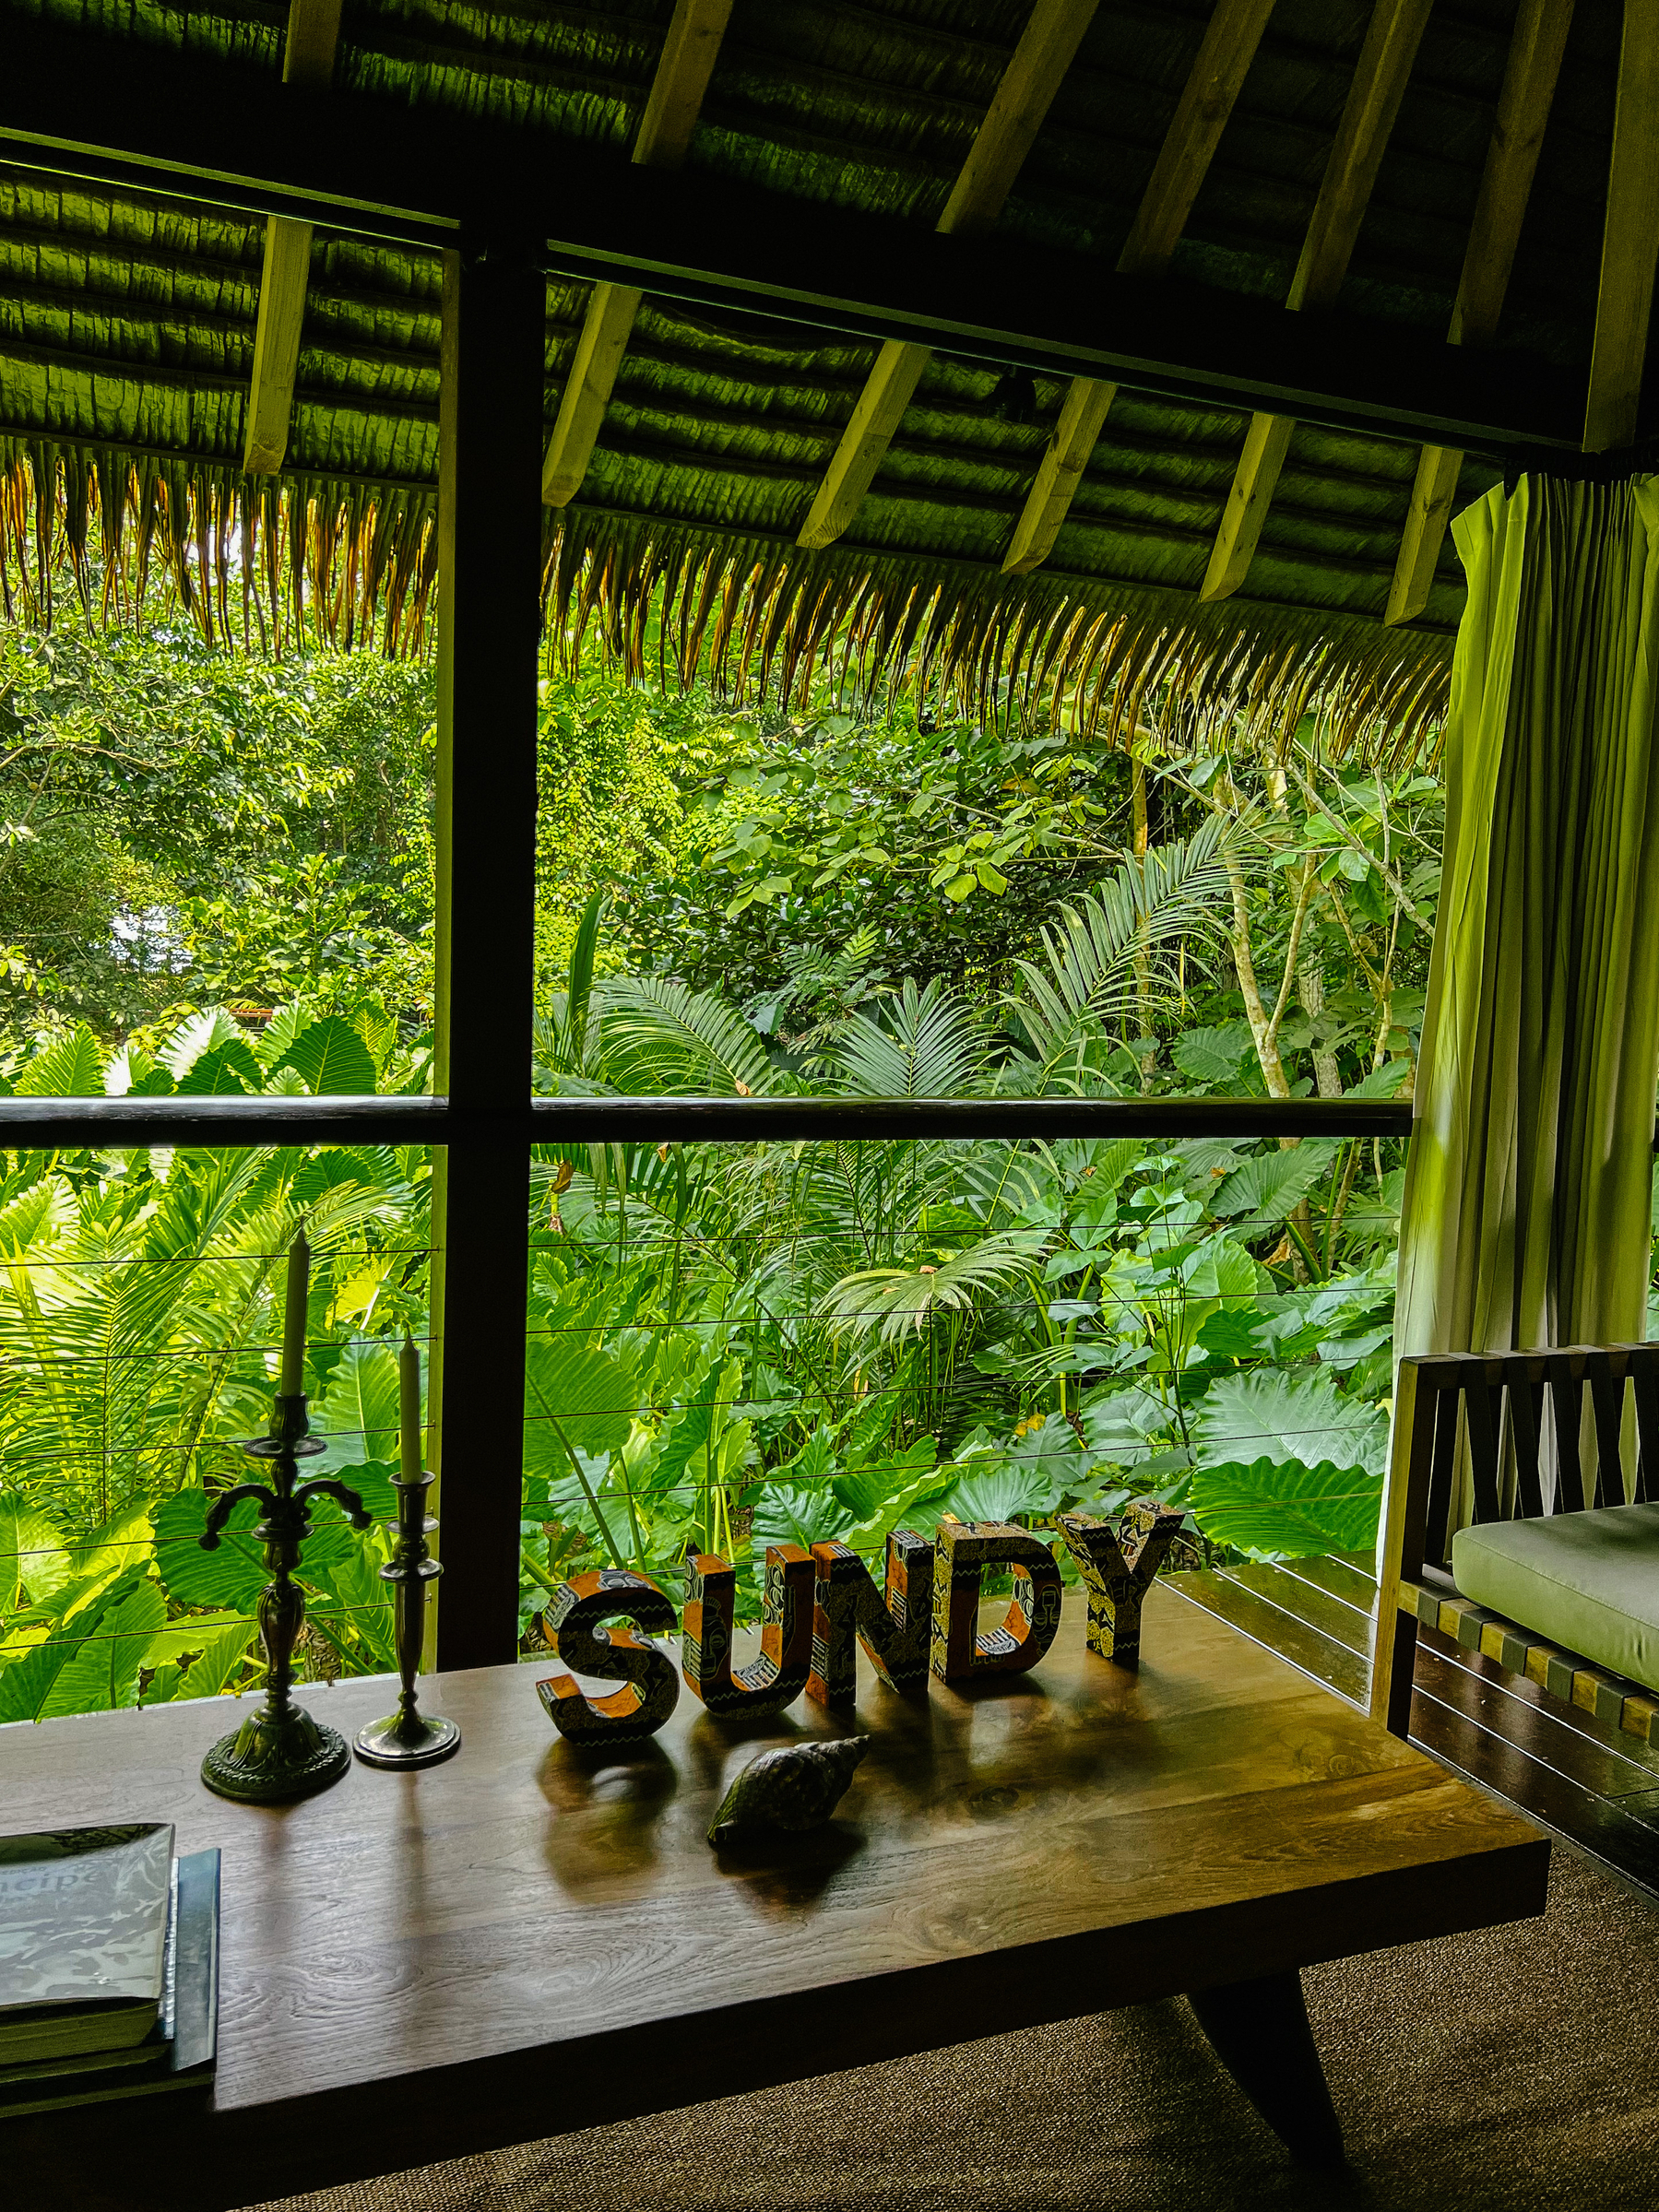 Looking out into the rainforest, we can see a table with some books, candles, and the word “Sundy” made with wooden letters. 